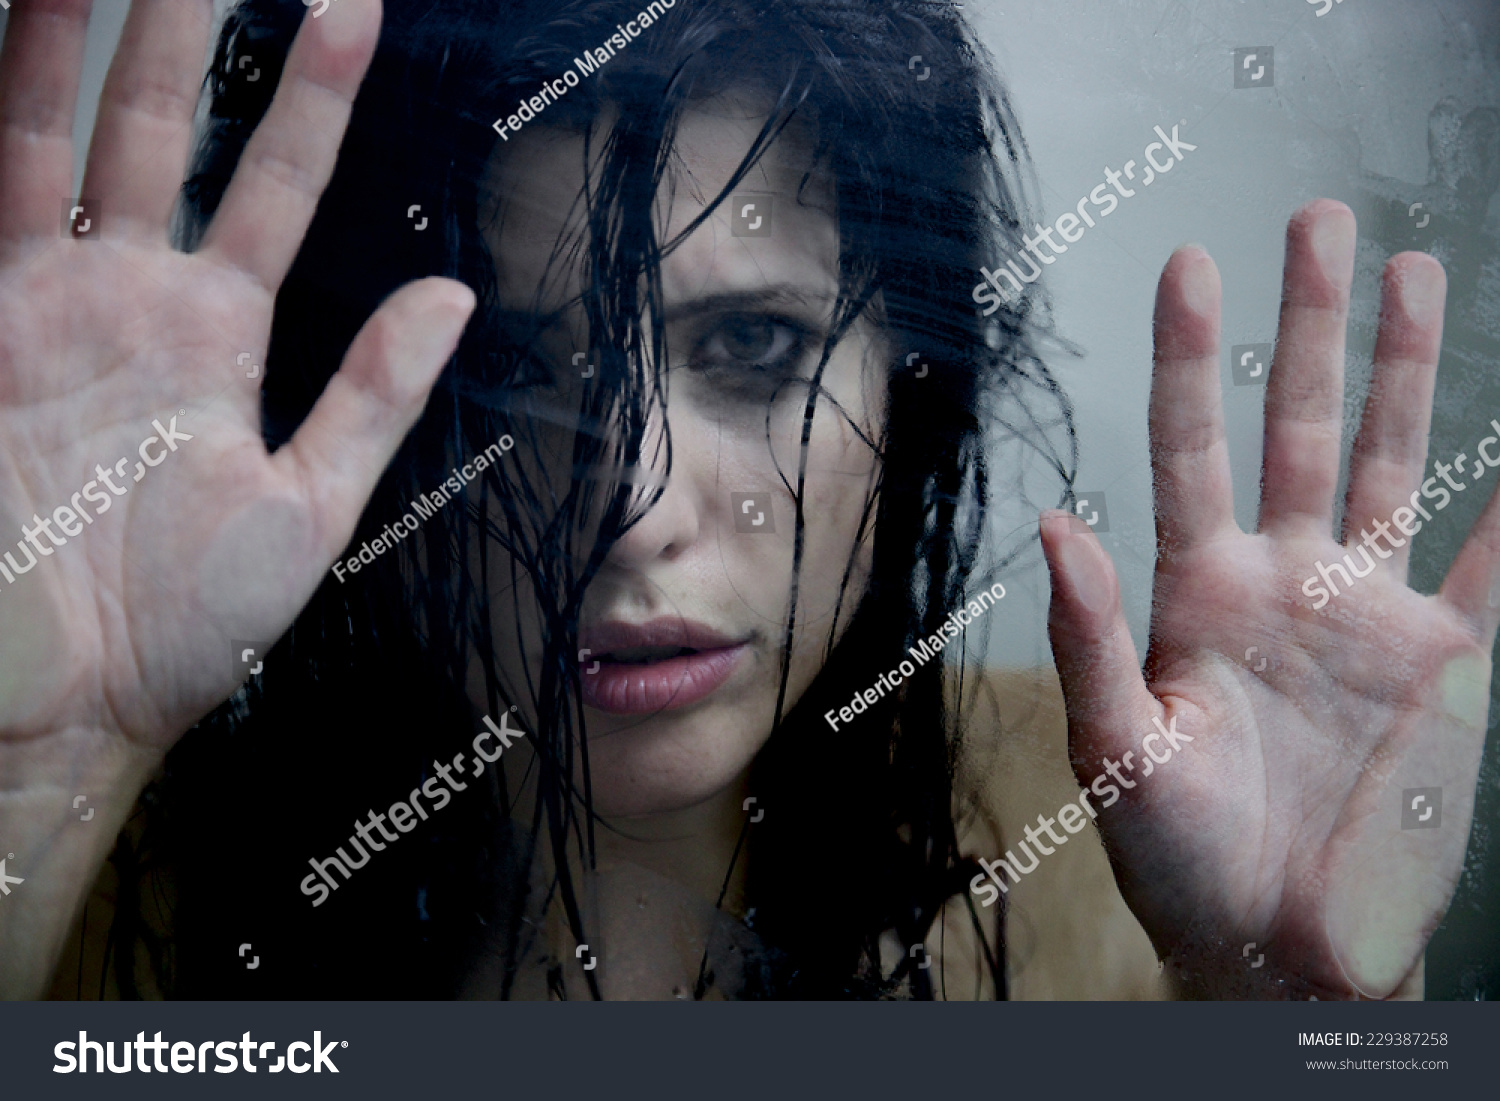 Woman Under The Shower After Abuse Crying Stock Photo 229387258